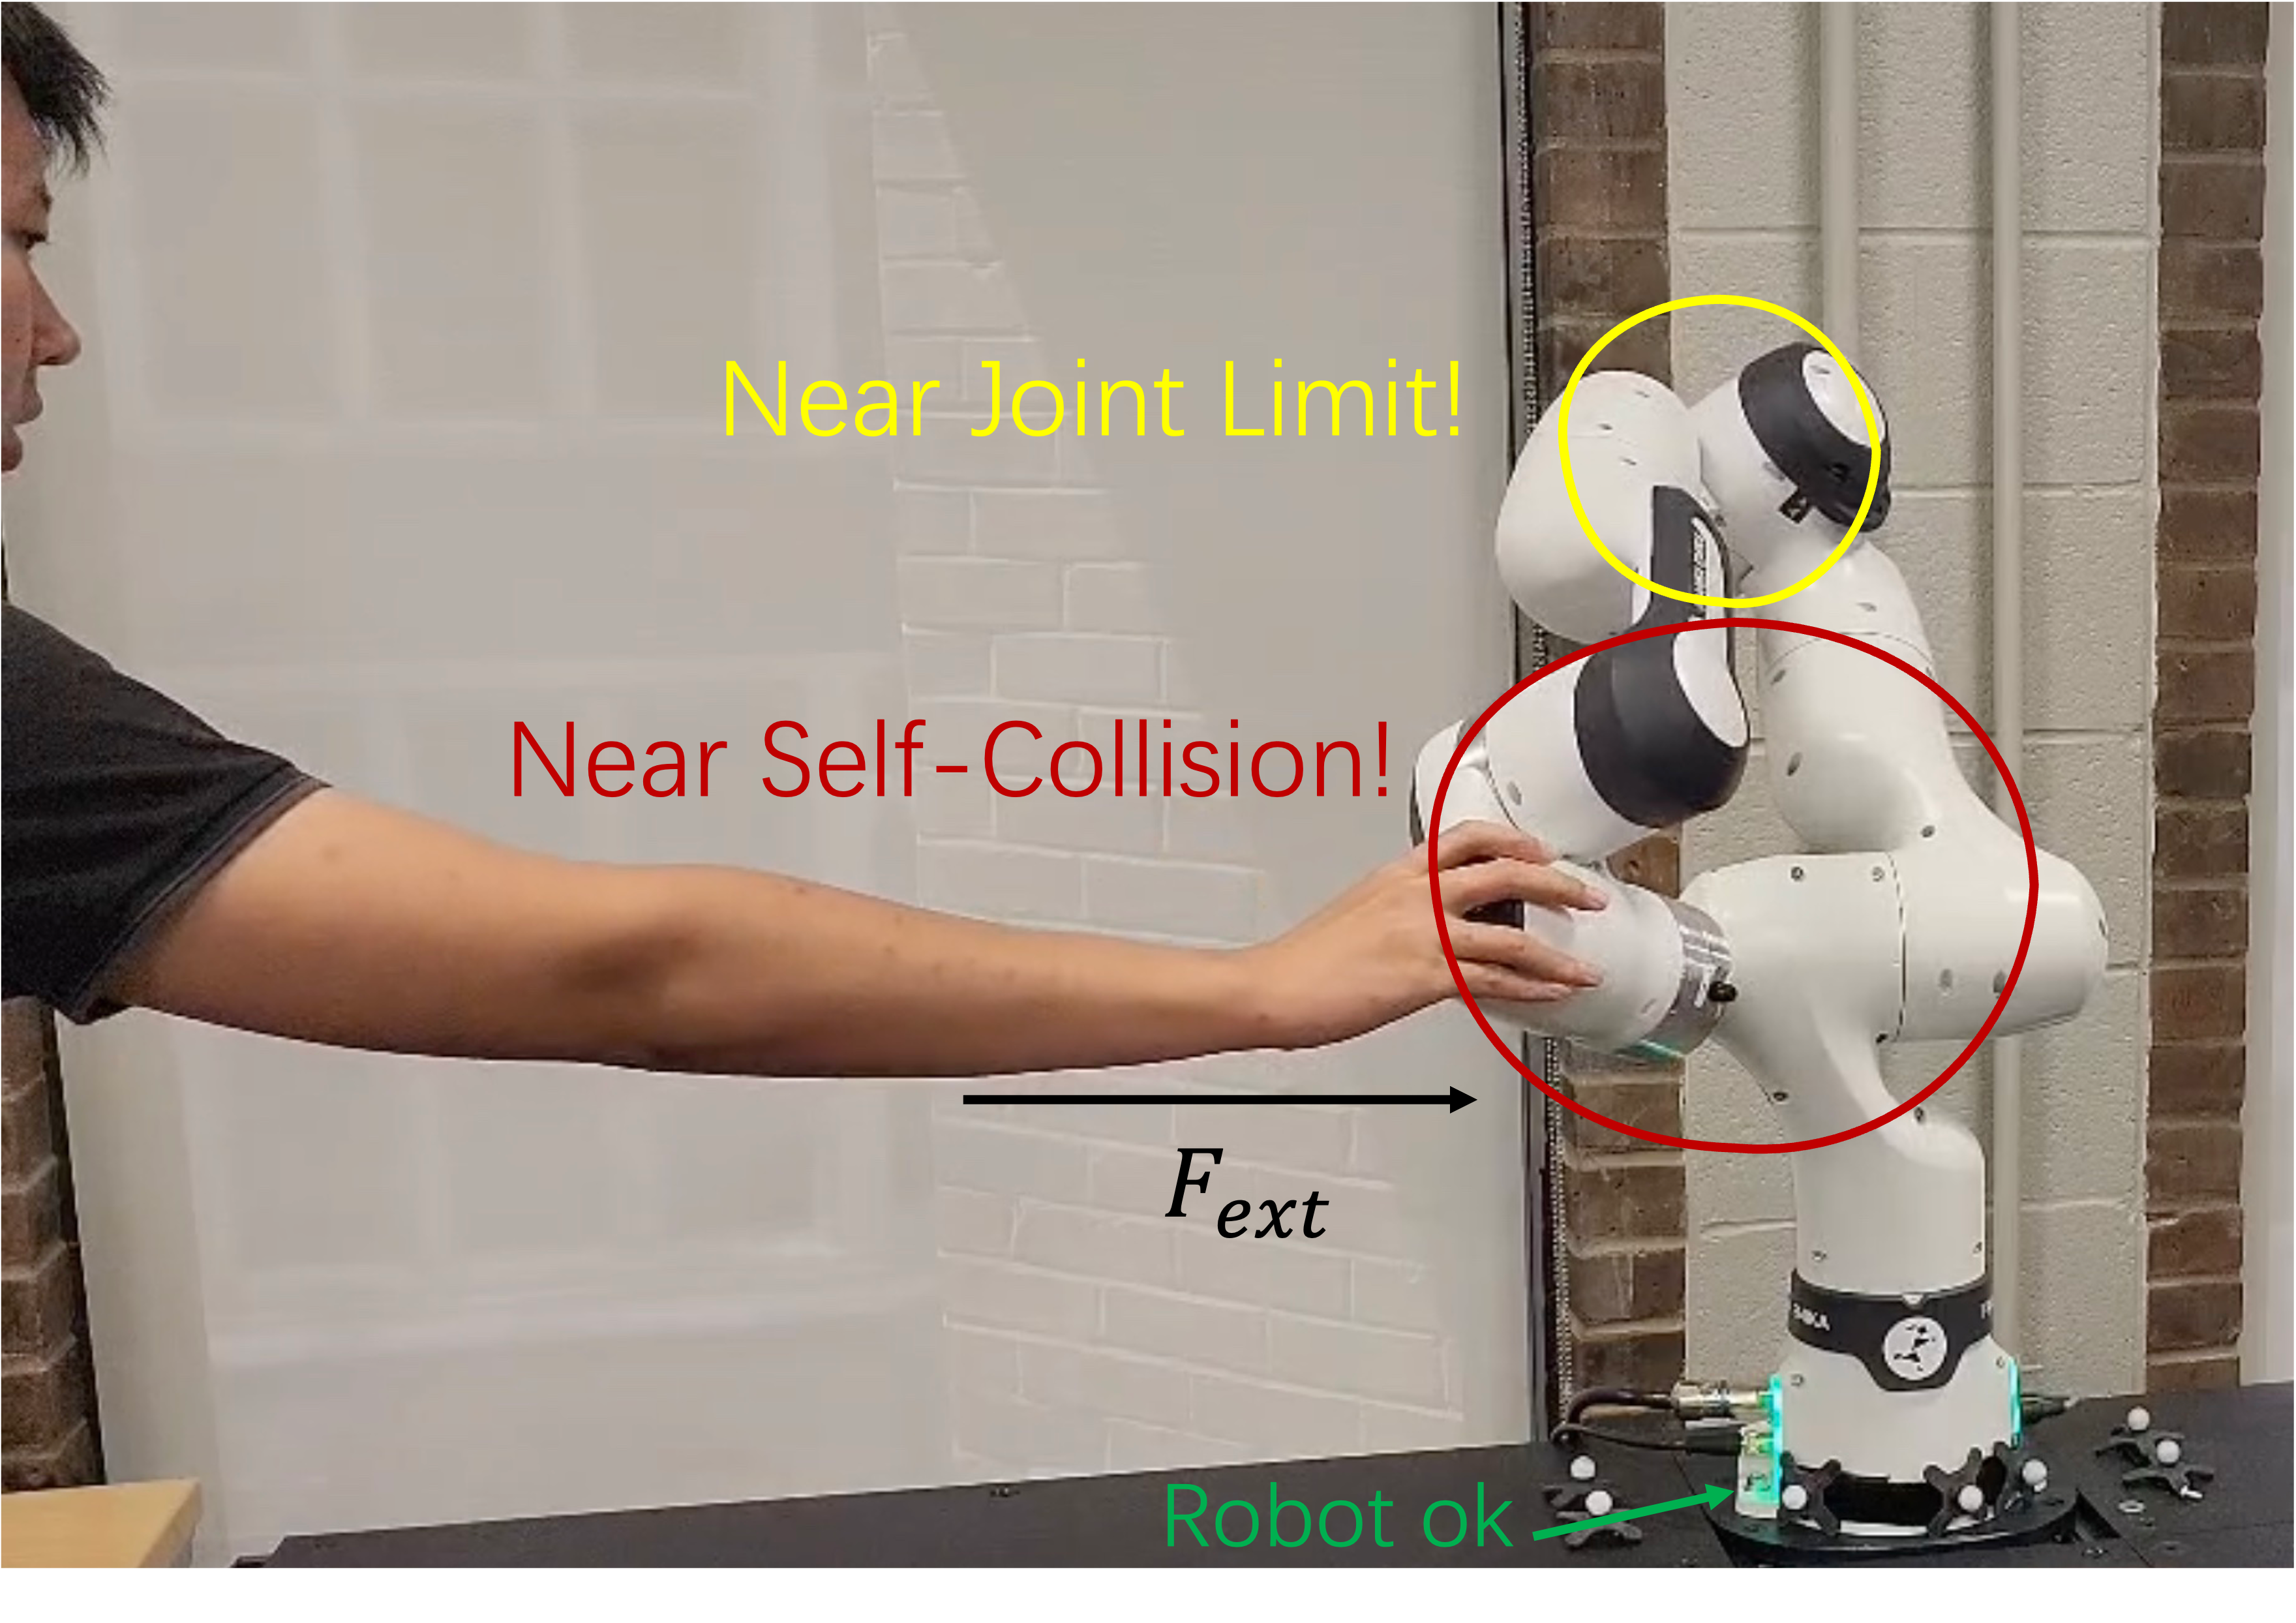 Constrained Passive Interaction Control: Leveraging Passivity and Safety for Robot Manipulators